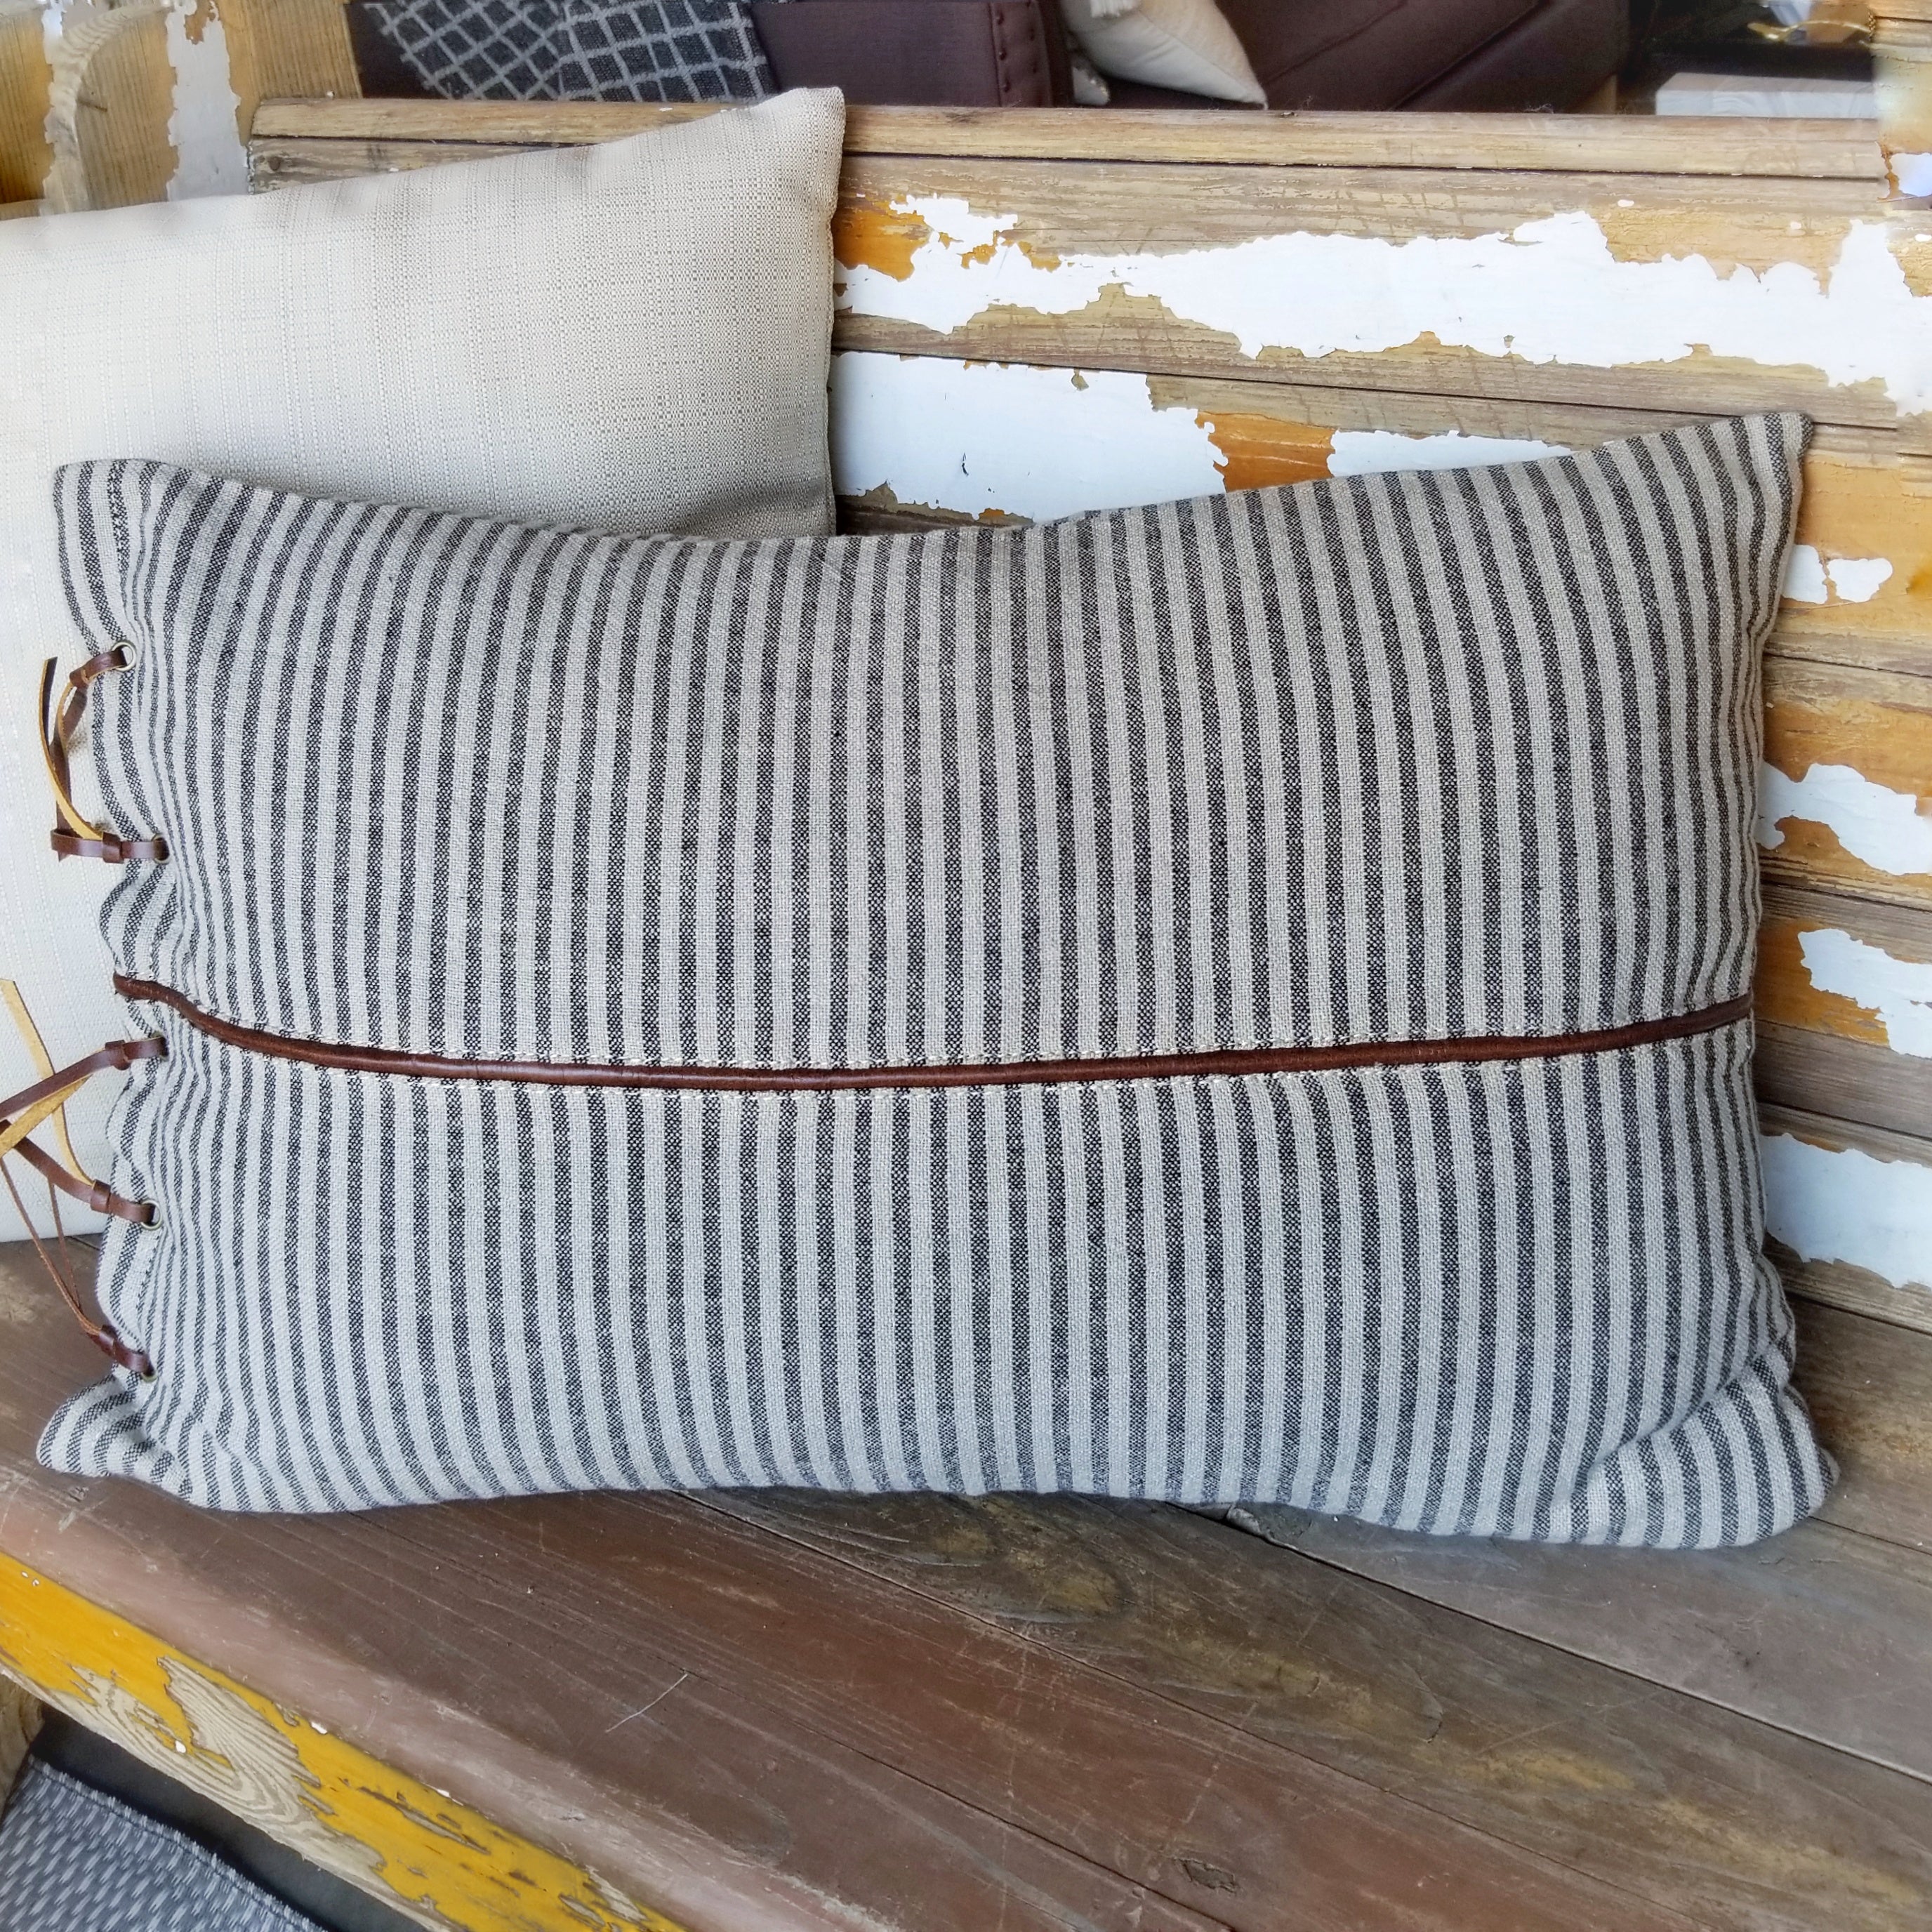 Leather Trim Pillows